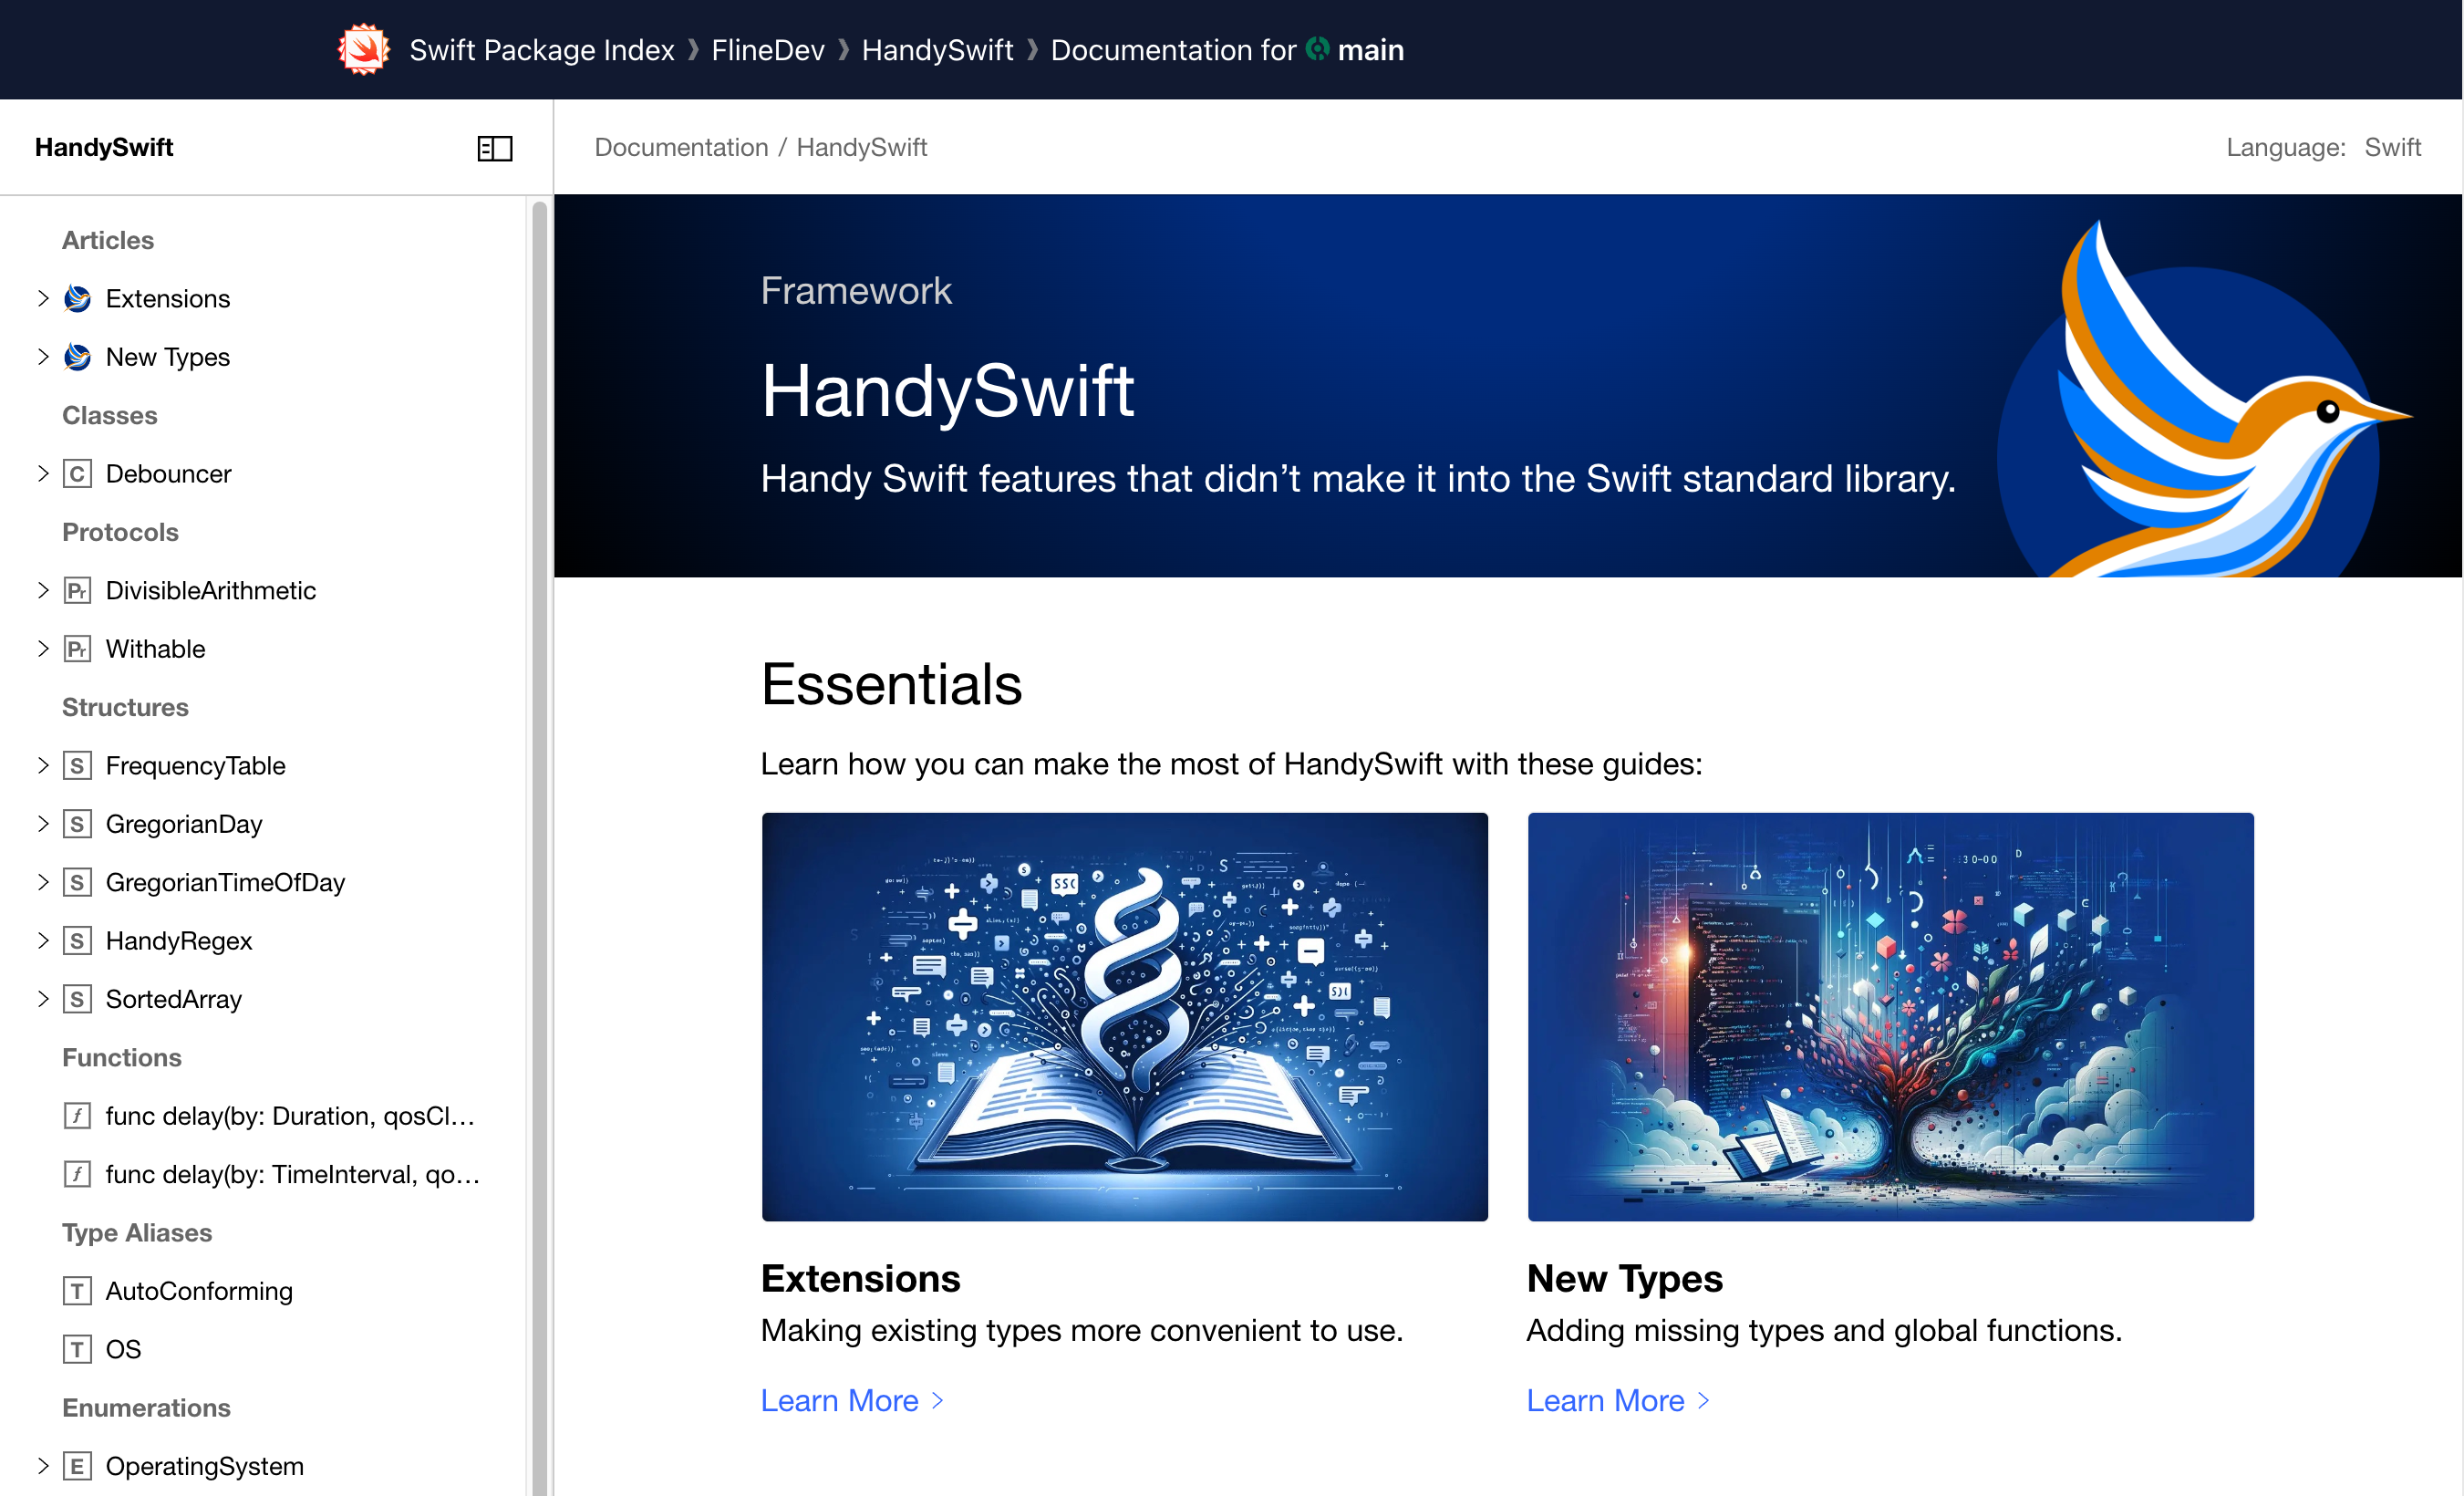 The HandySwift documentation showing a customised theme with a gradient background and a logo image.